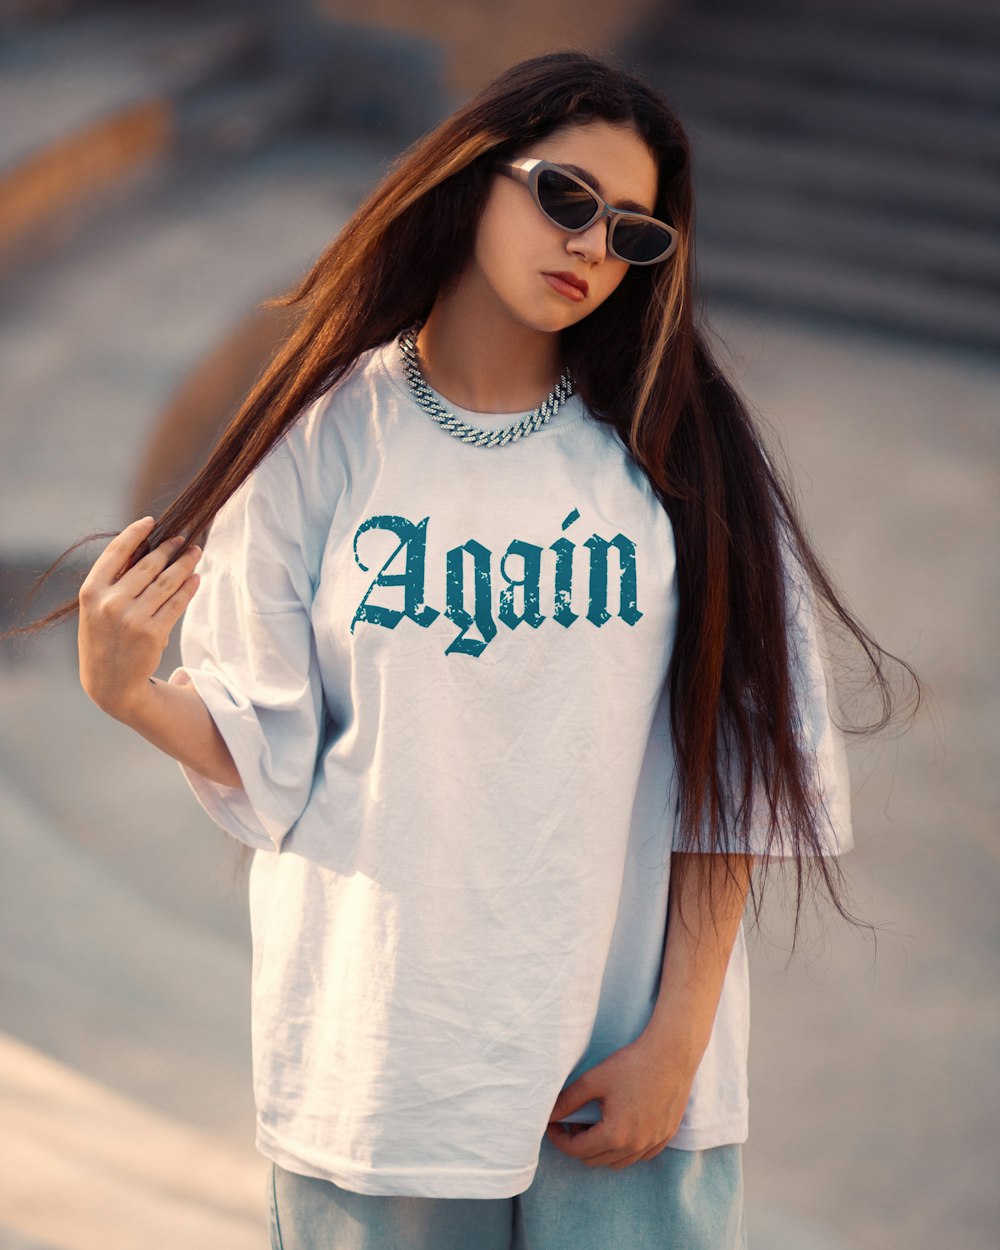 a woman with long hair wearing sunglasses and a t - shirt